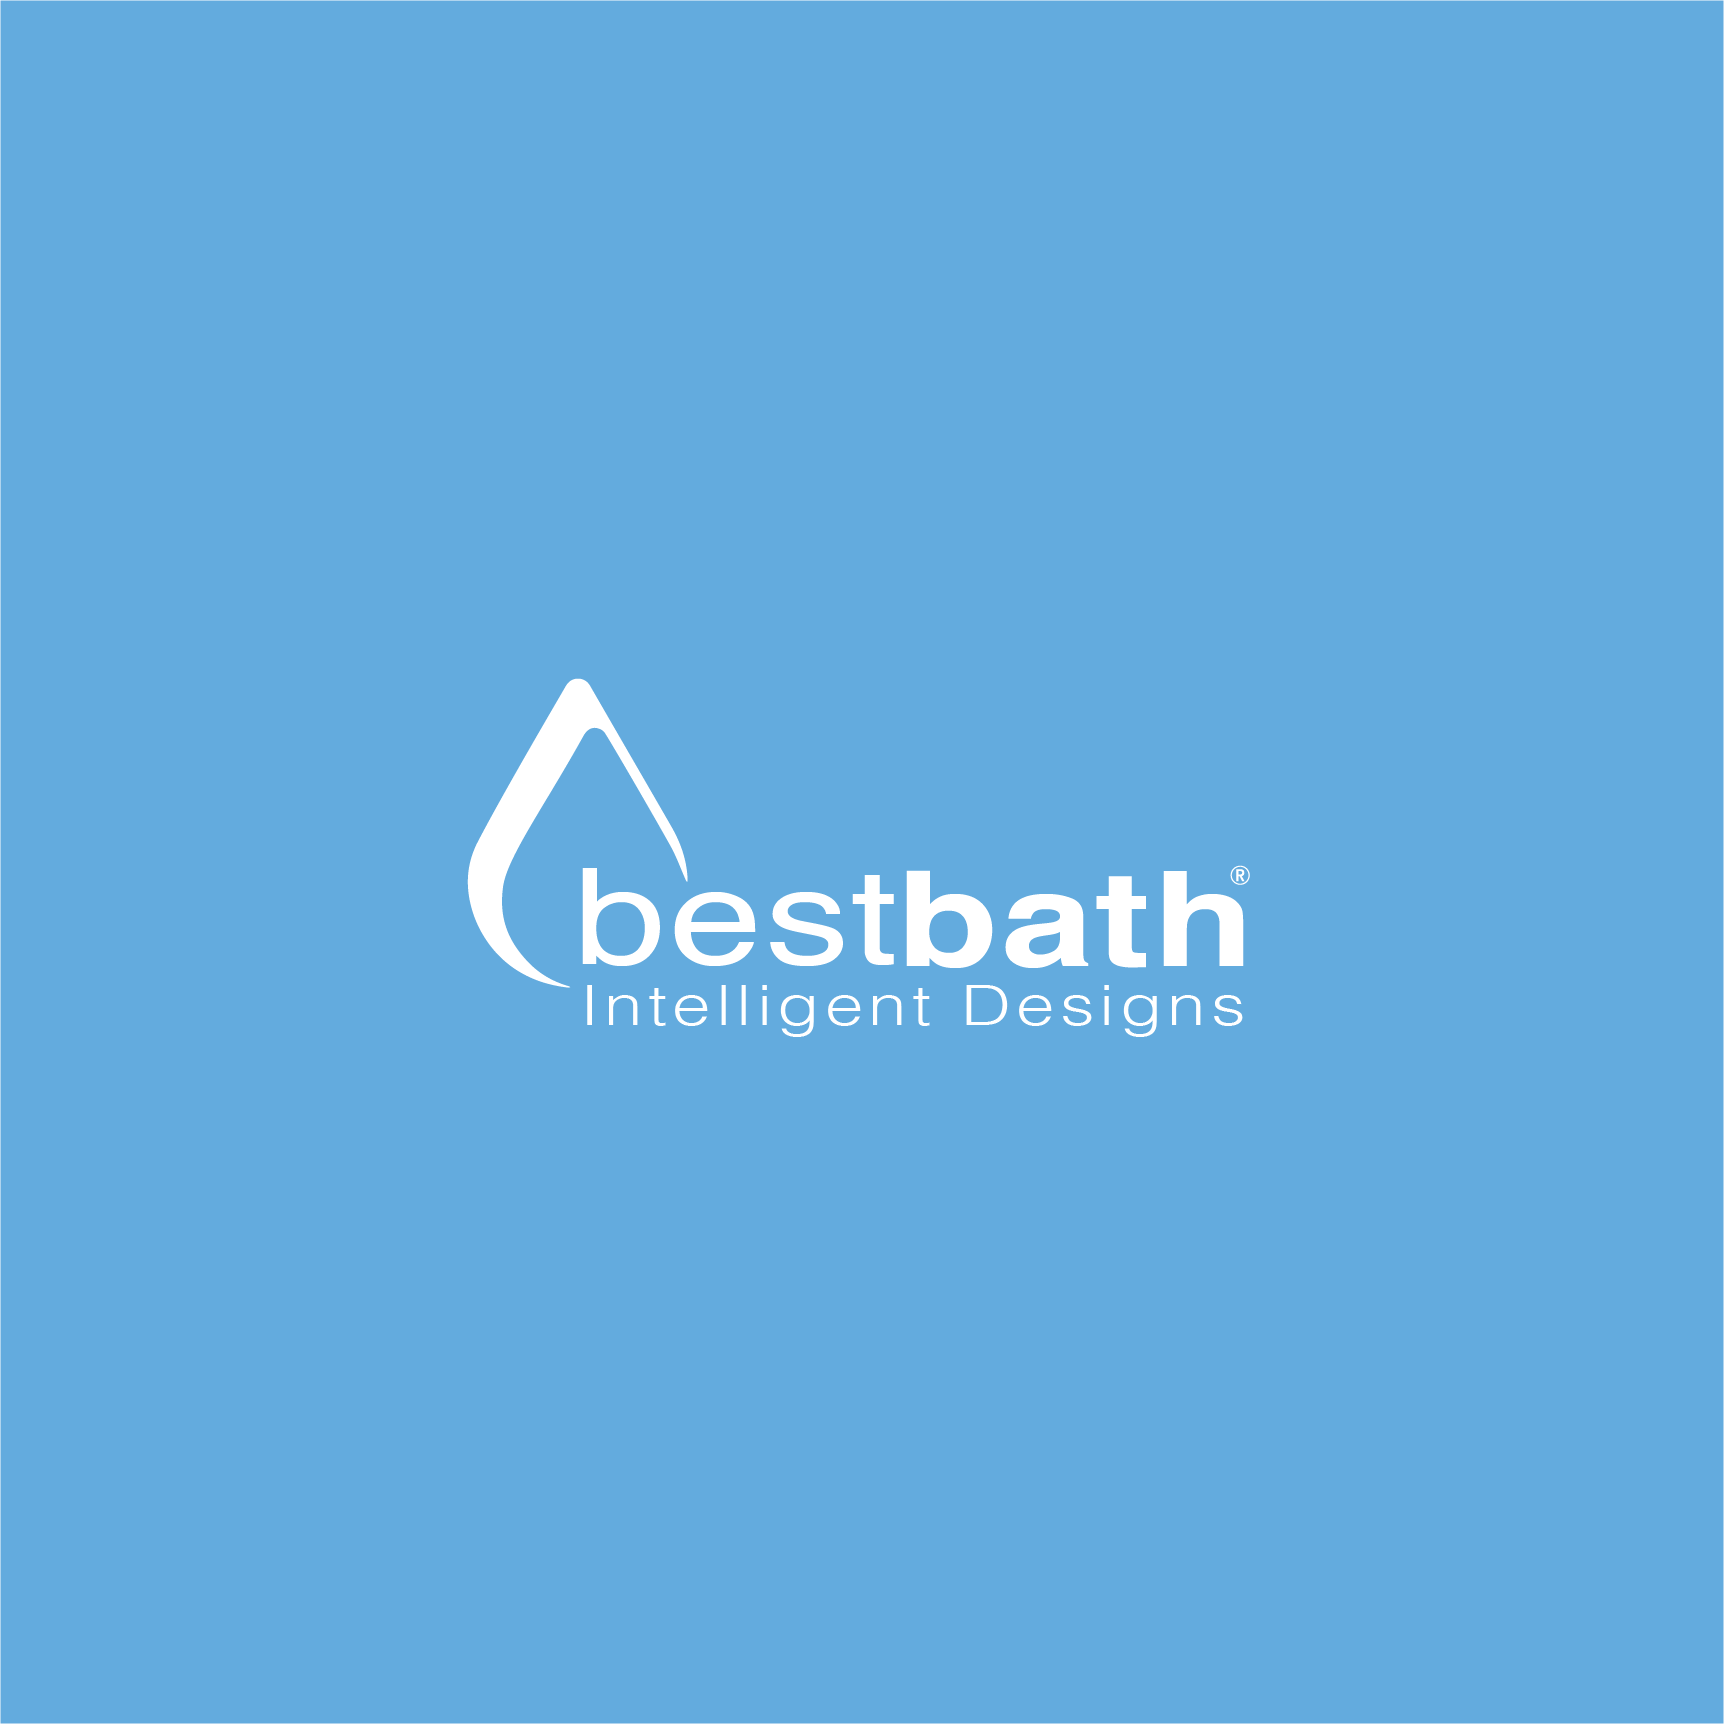 Builder Online: Bestbath Featured for American-Made Products